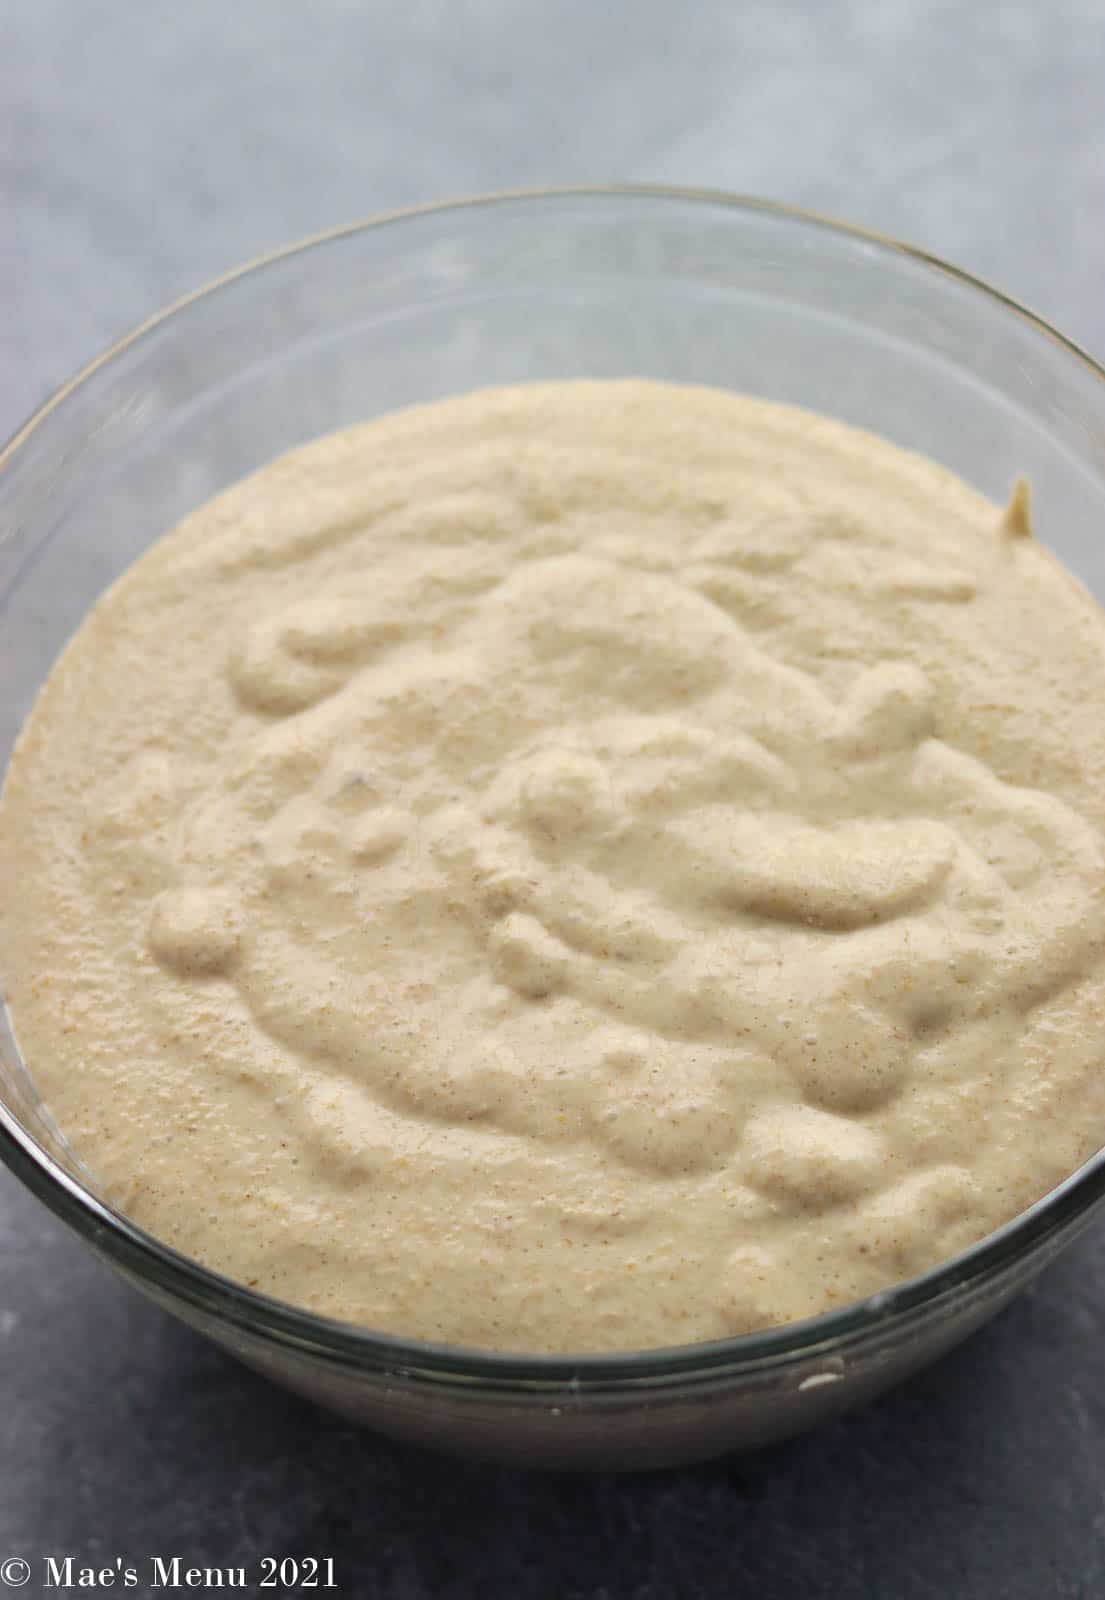 The pancake batter resting in a glass bowl